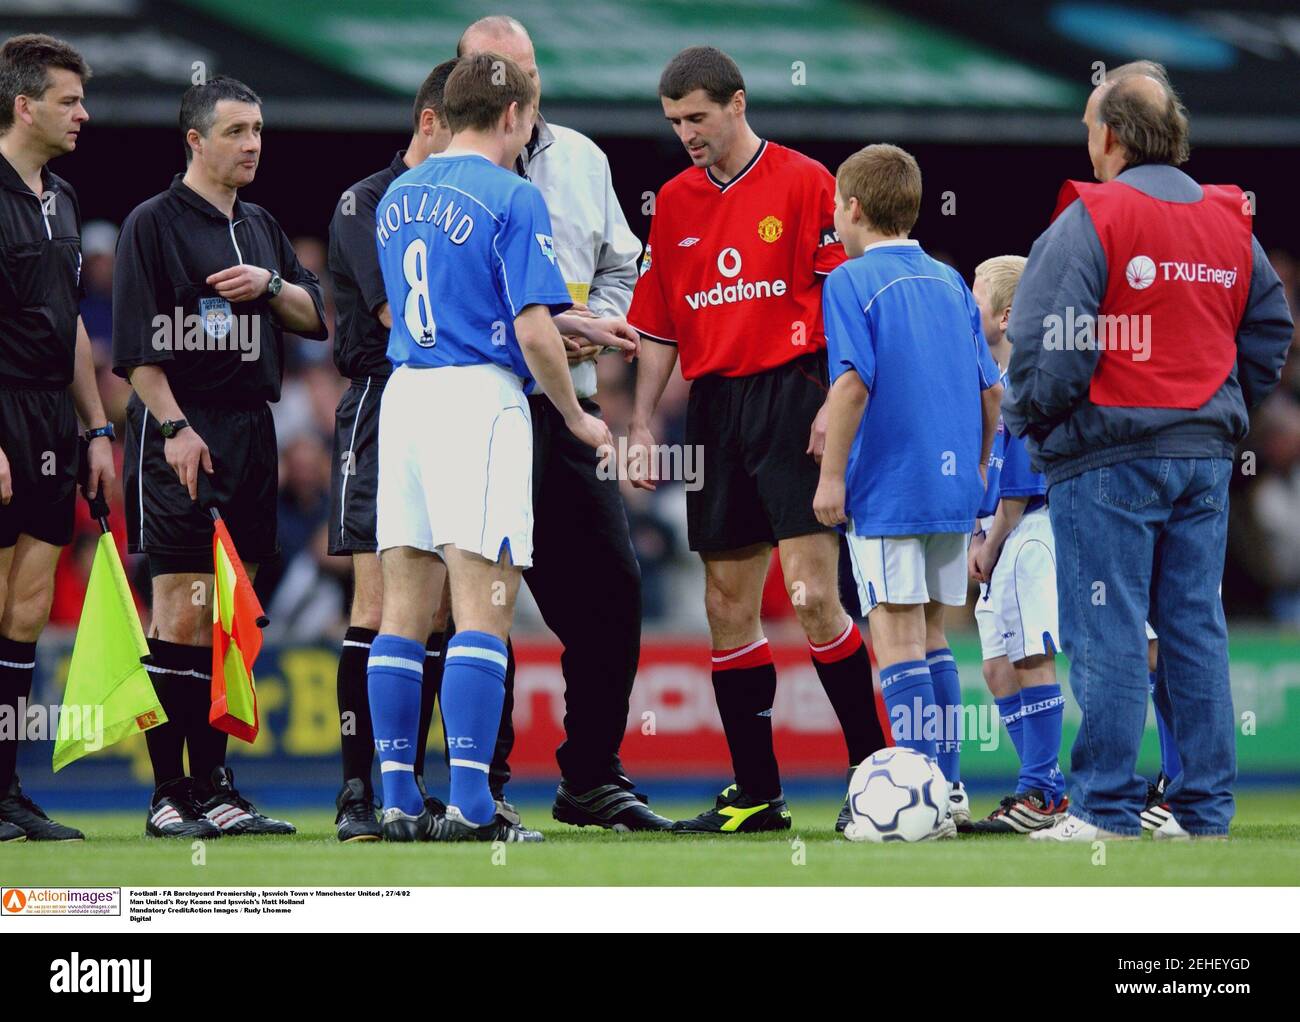 Football - FA Barclaycard Premiership , Ipswich Town v Manchester United ,  27/4/02 Man United's Roy Keane and Ipswich's Matt Holland Mandatory  Credit:Action Images / Rudy Lhomme Digital Stock Photo - Alamy